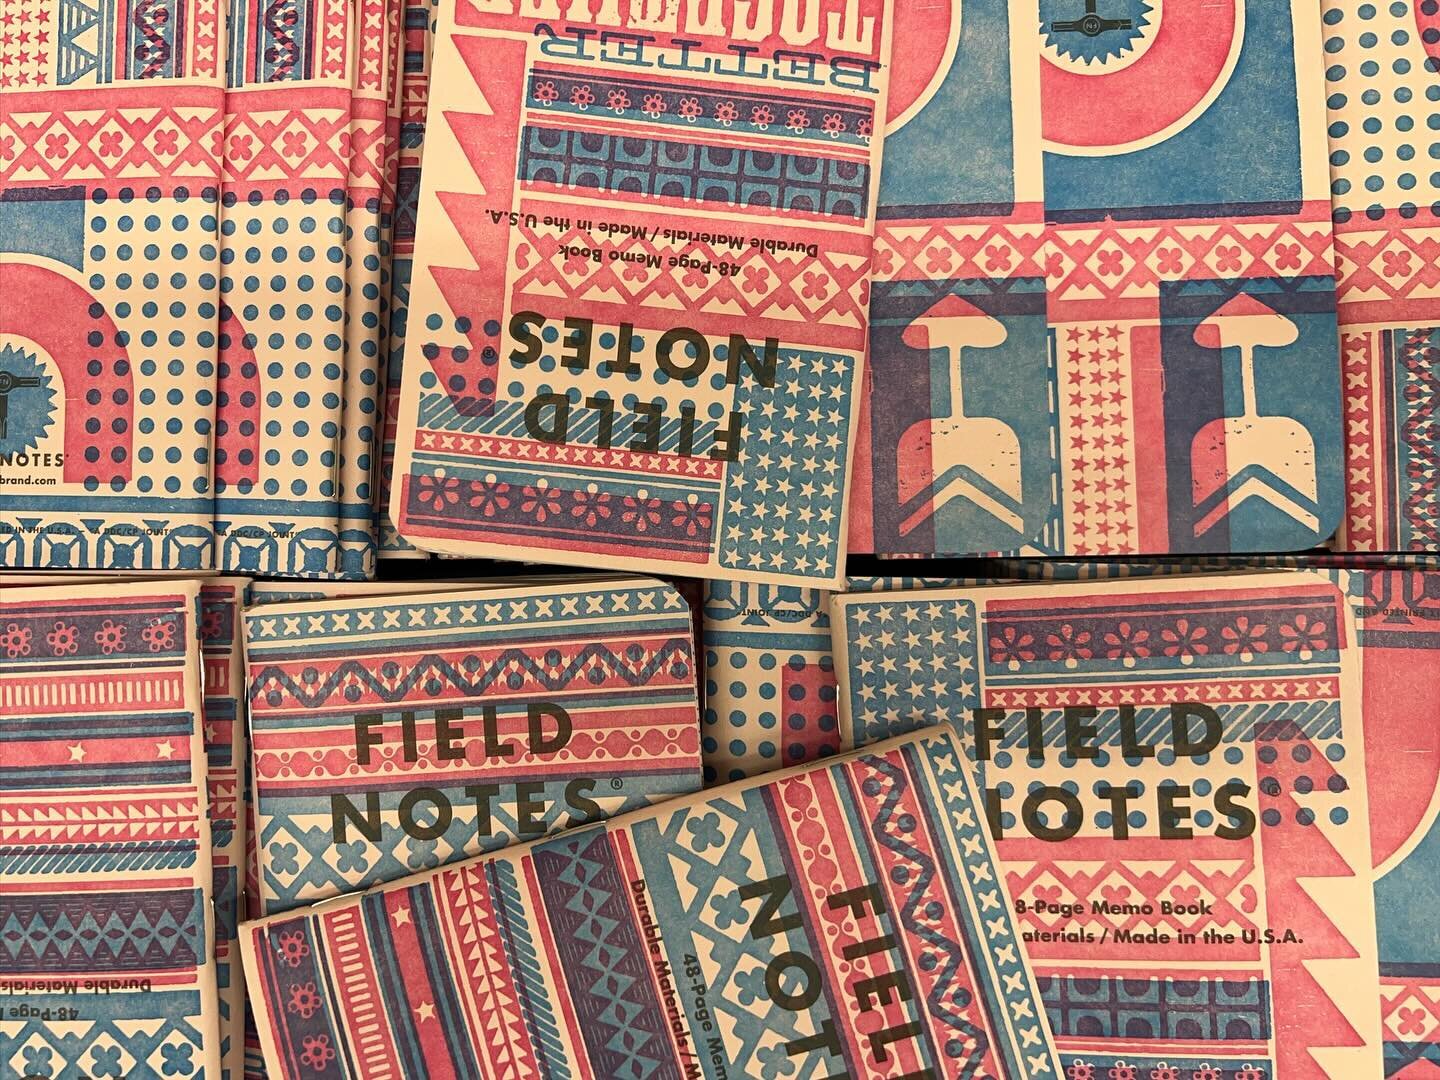 My pals @fieldnotesbrand sent me a huge box of loosies! This United States of Letterpress project was one of my favorites. Getting to make things with your friends is the best!